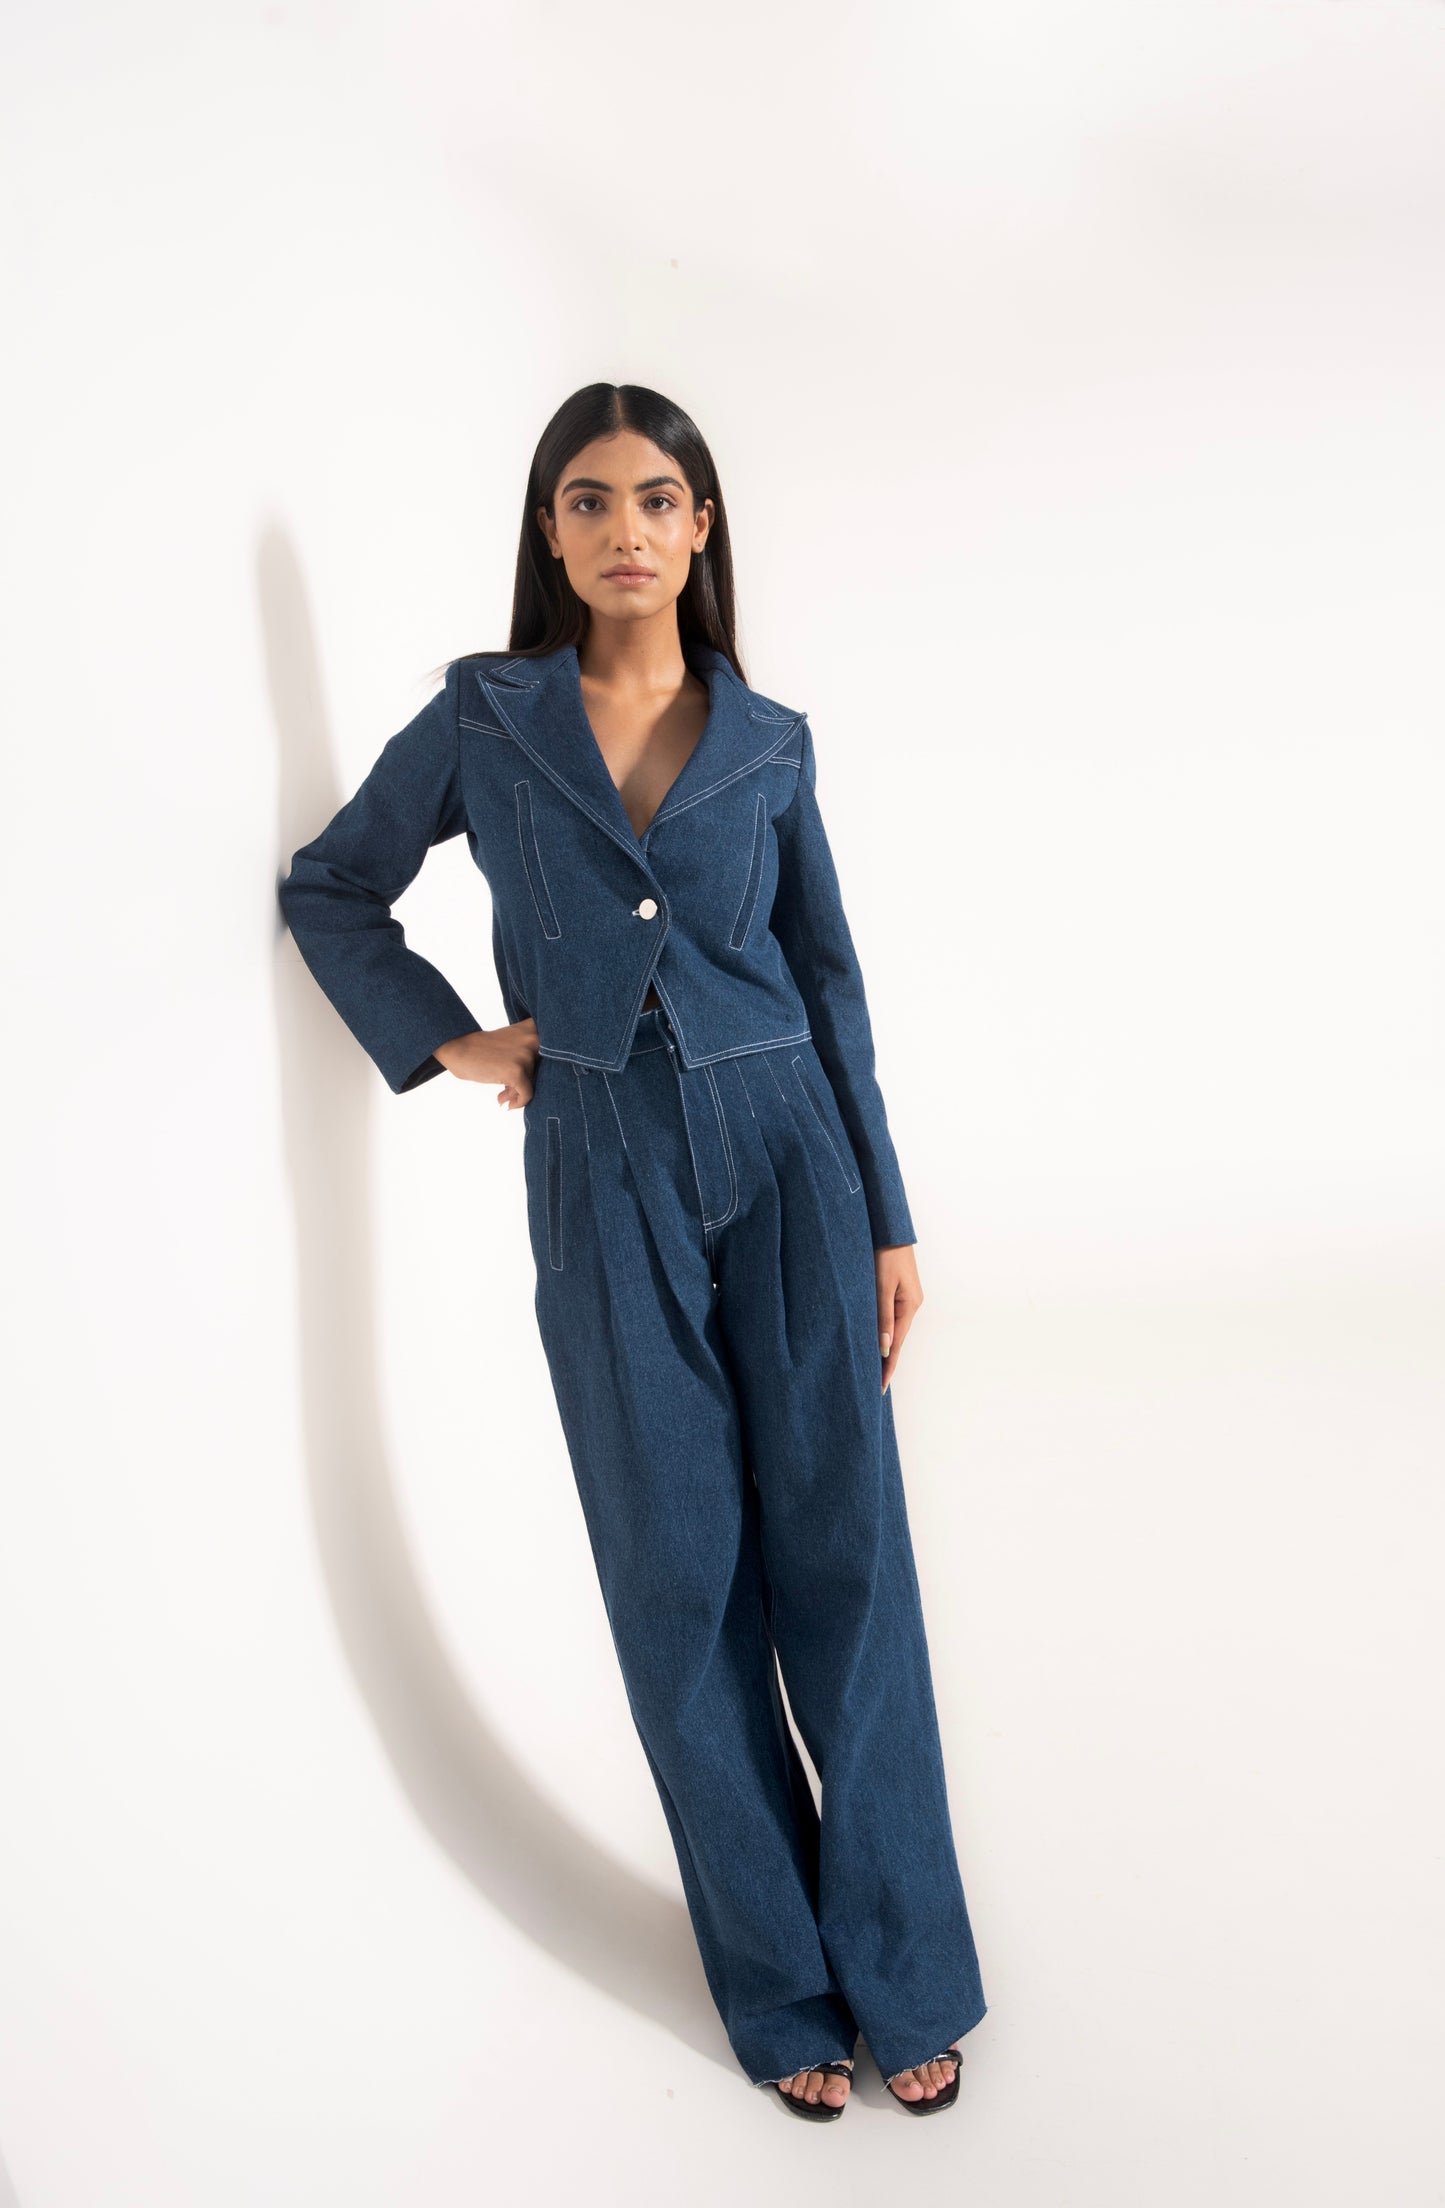 High-waisted pleated denims with topstitching